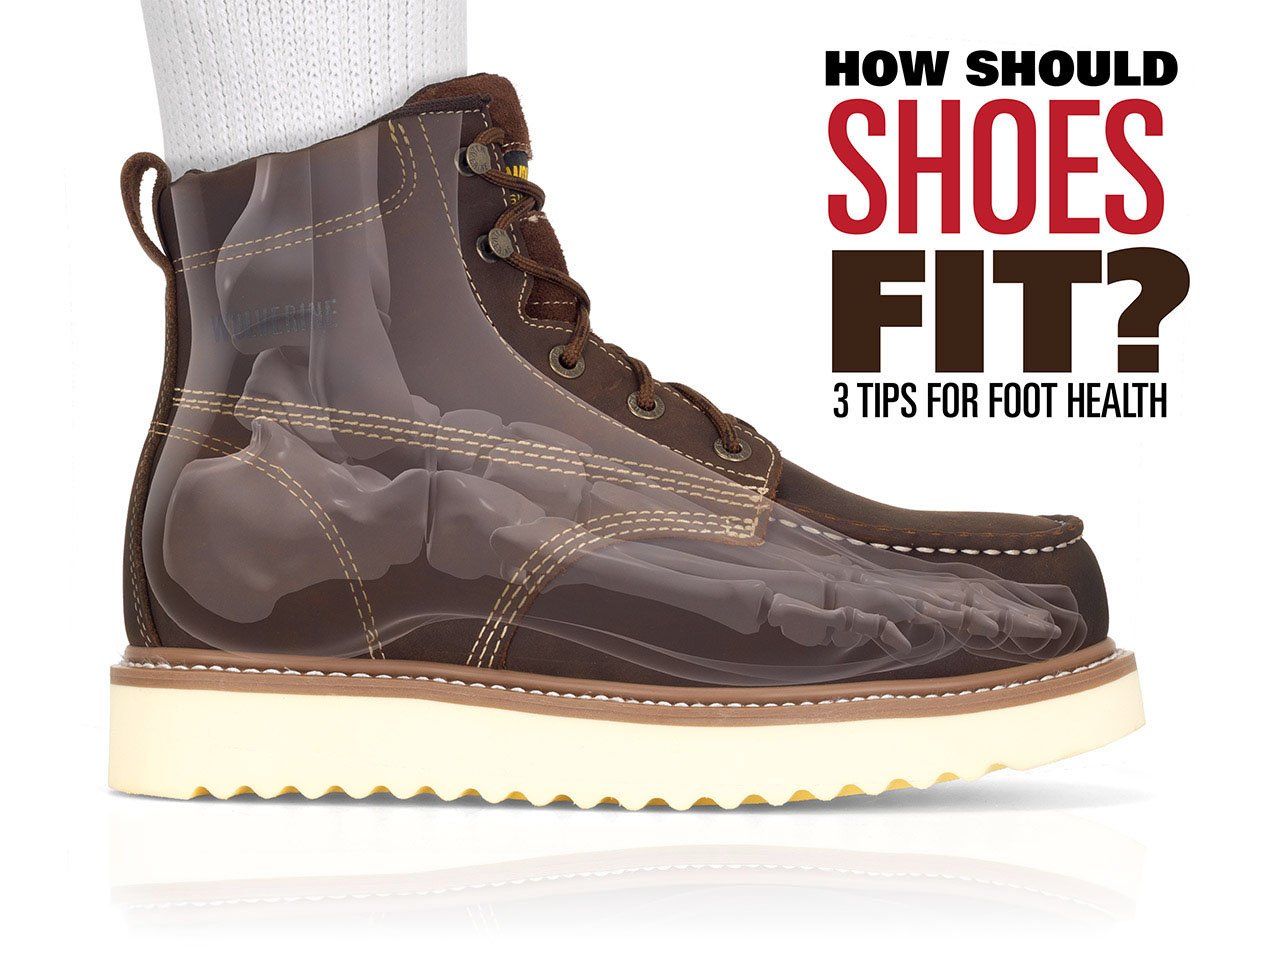 How Should Shoes Fit? 3 Tips for Foot Health